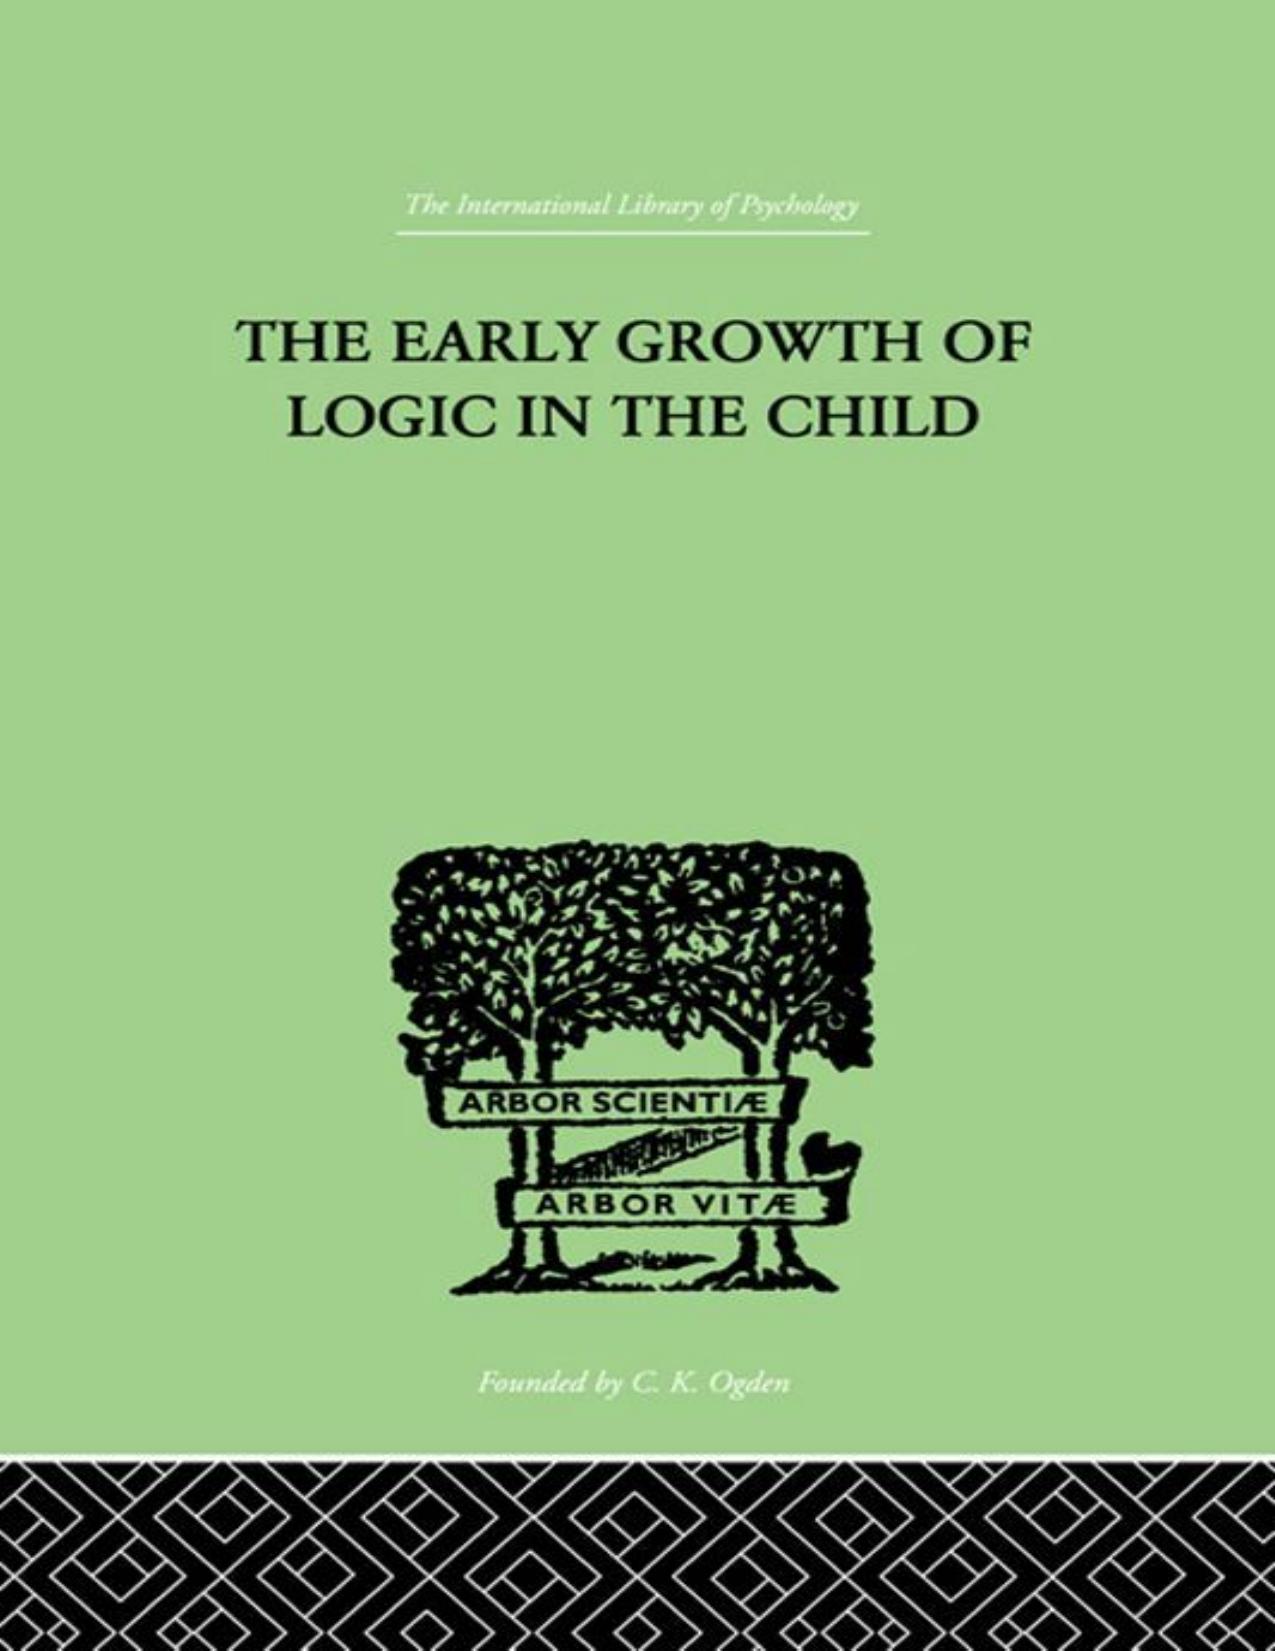 Early Growth of Logic in the Child Classification and Seriation, The - Brbel Inhelder & Jean Piaget.jpg